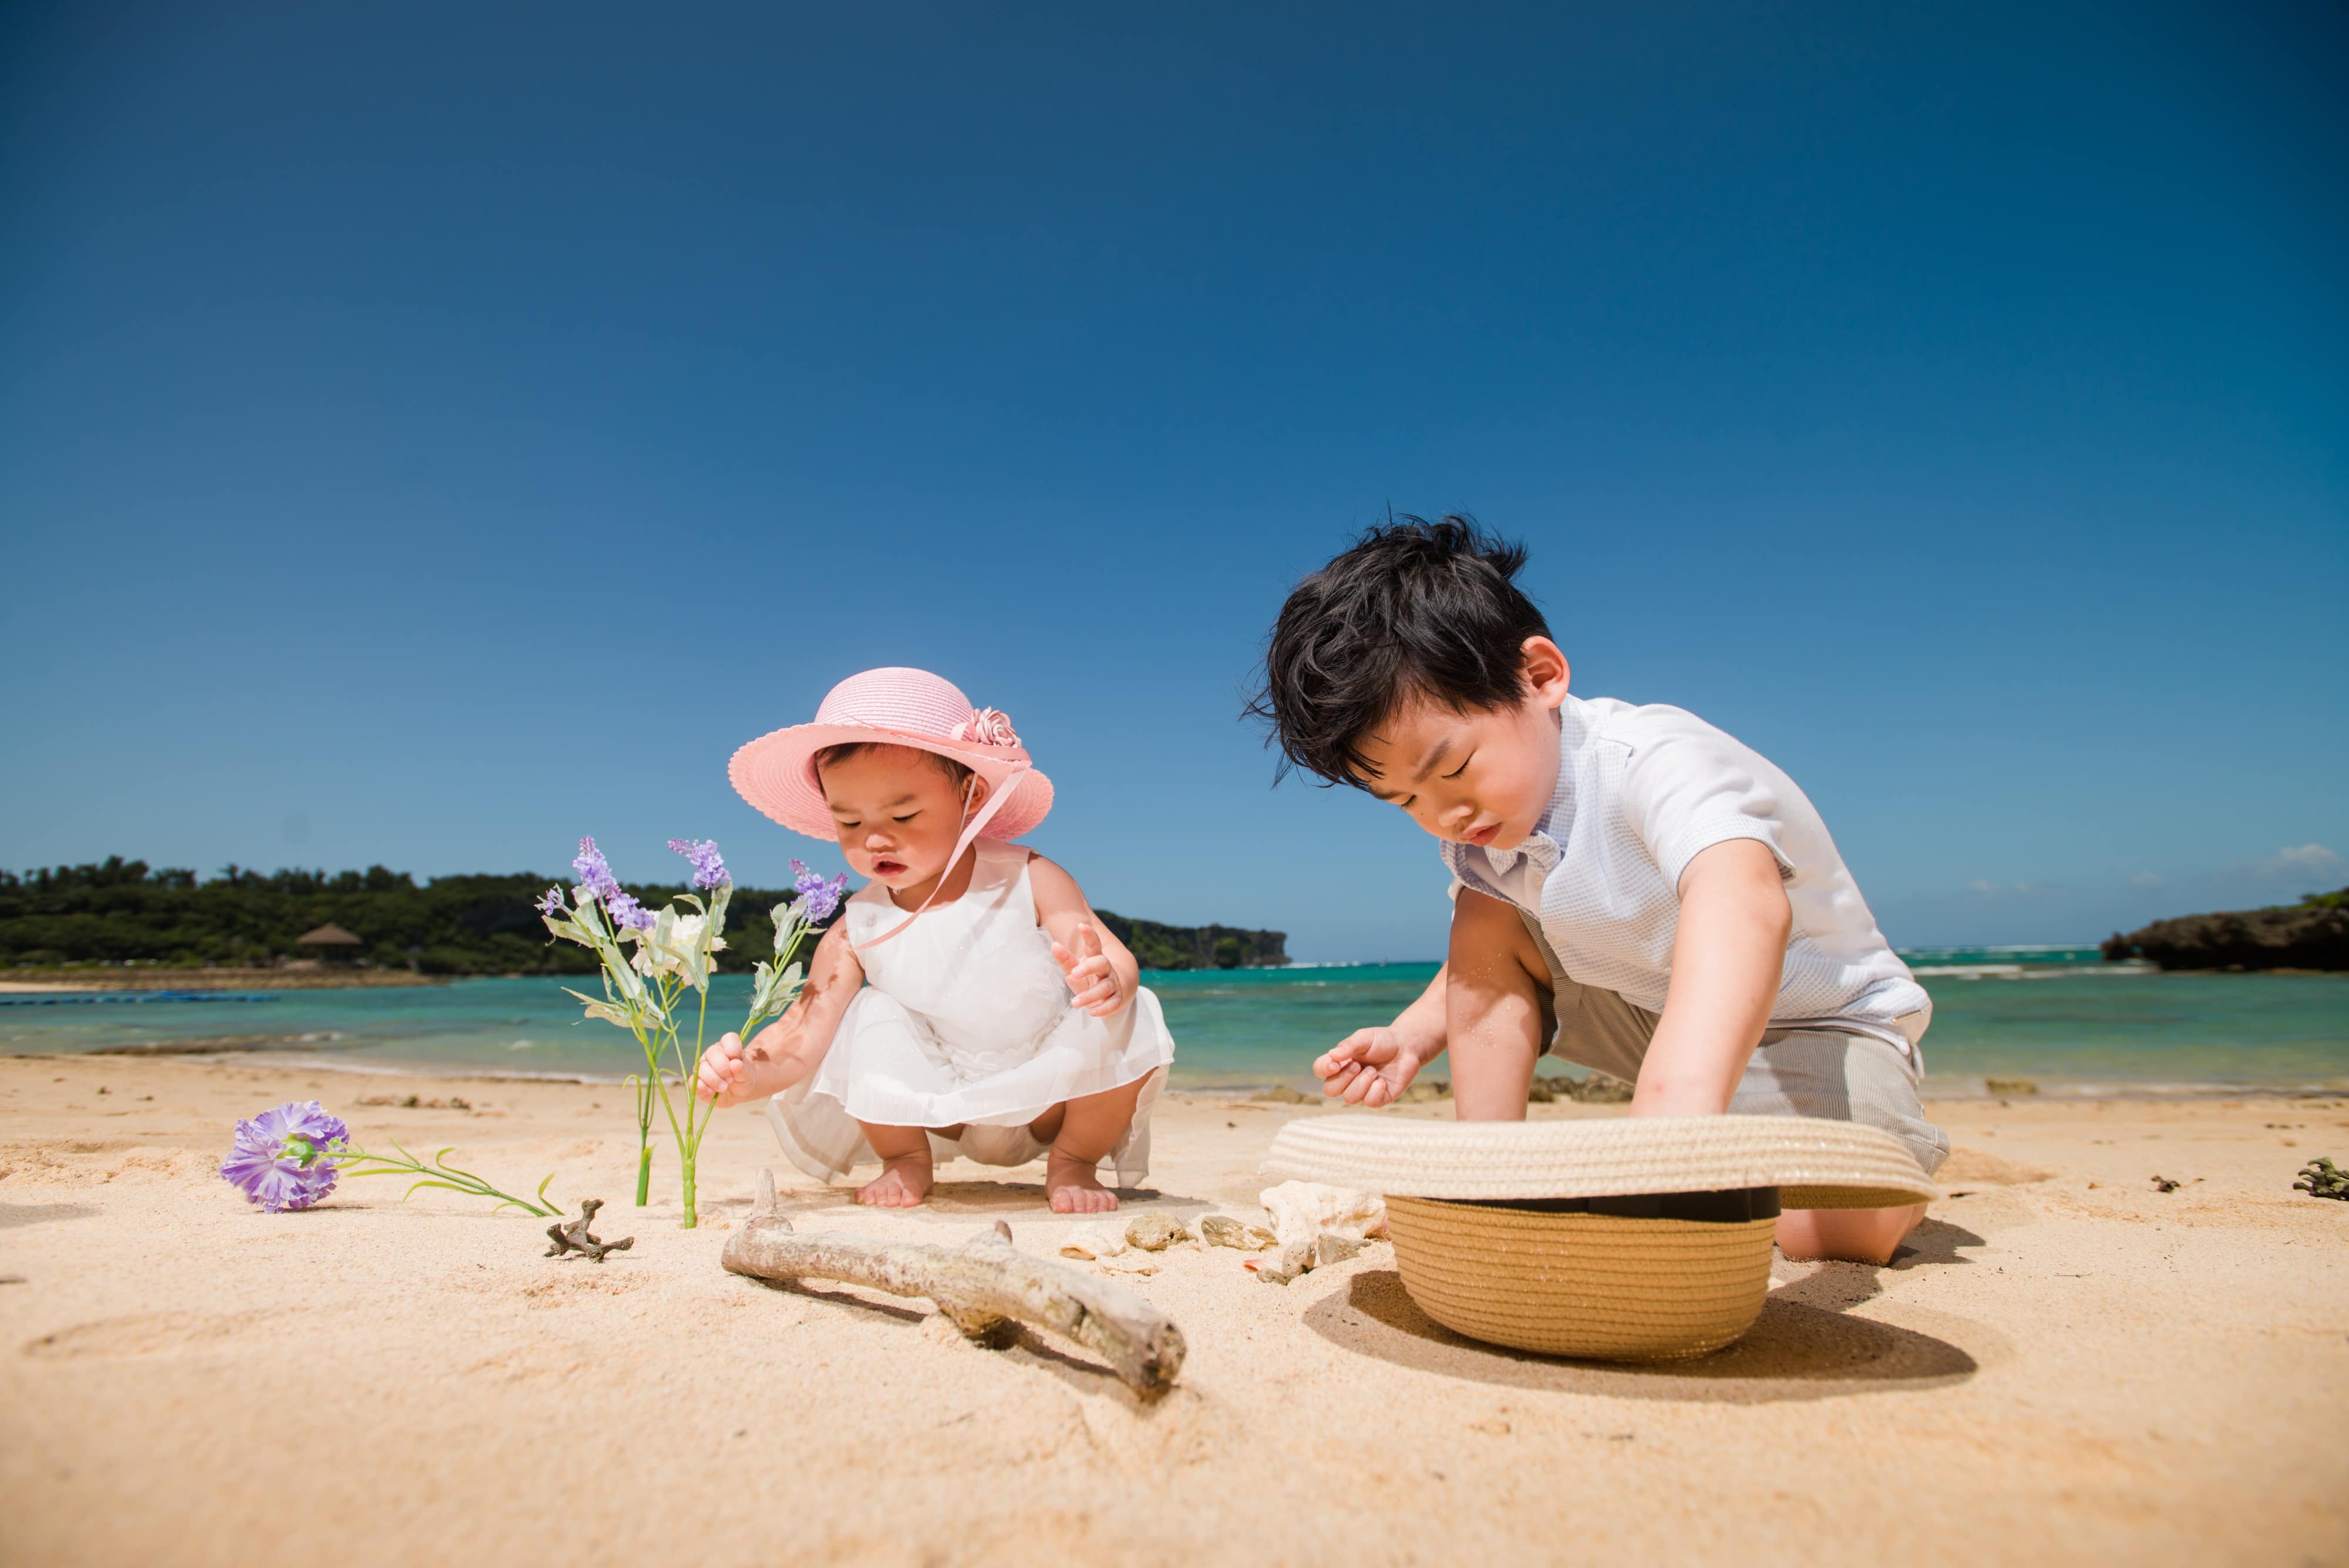 Our top tips for a baby friendly holiday at home or abroad